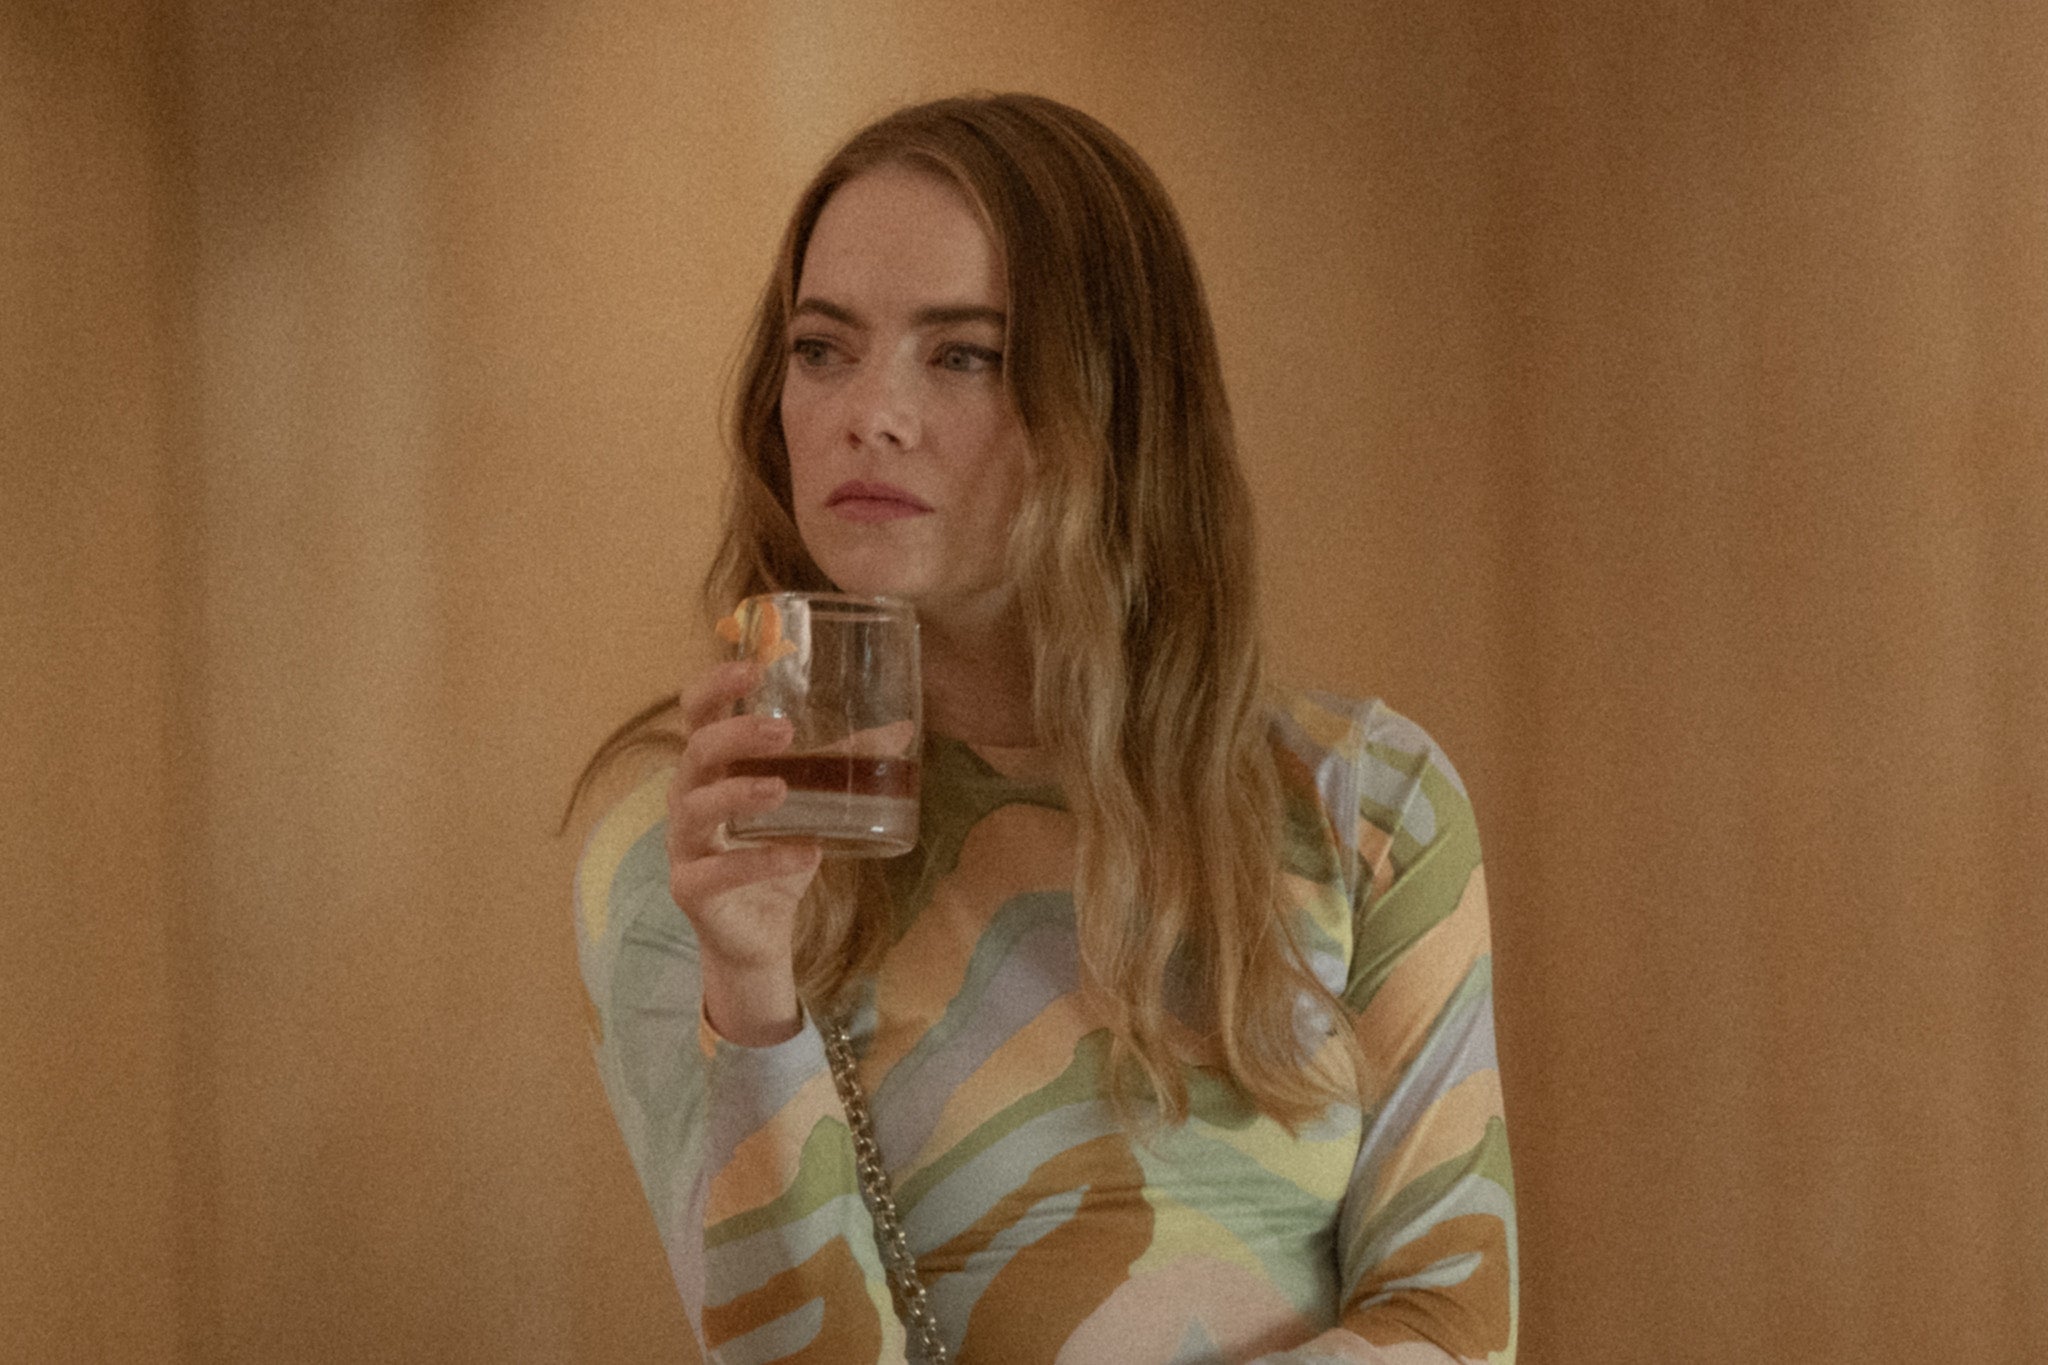 Unhinged: Emma Stone in ‘The Curse’